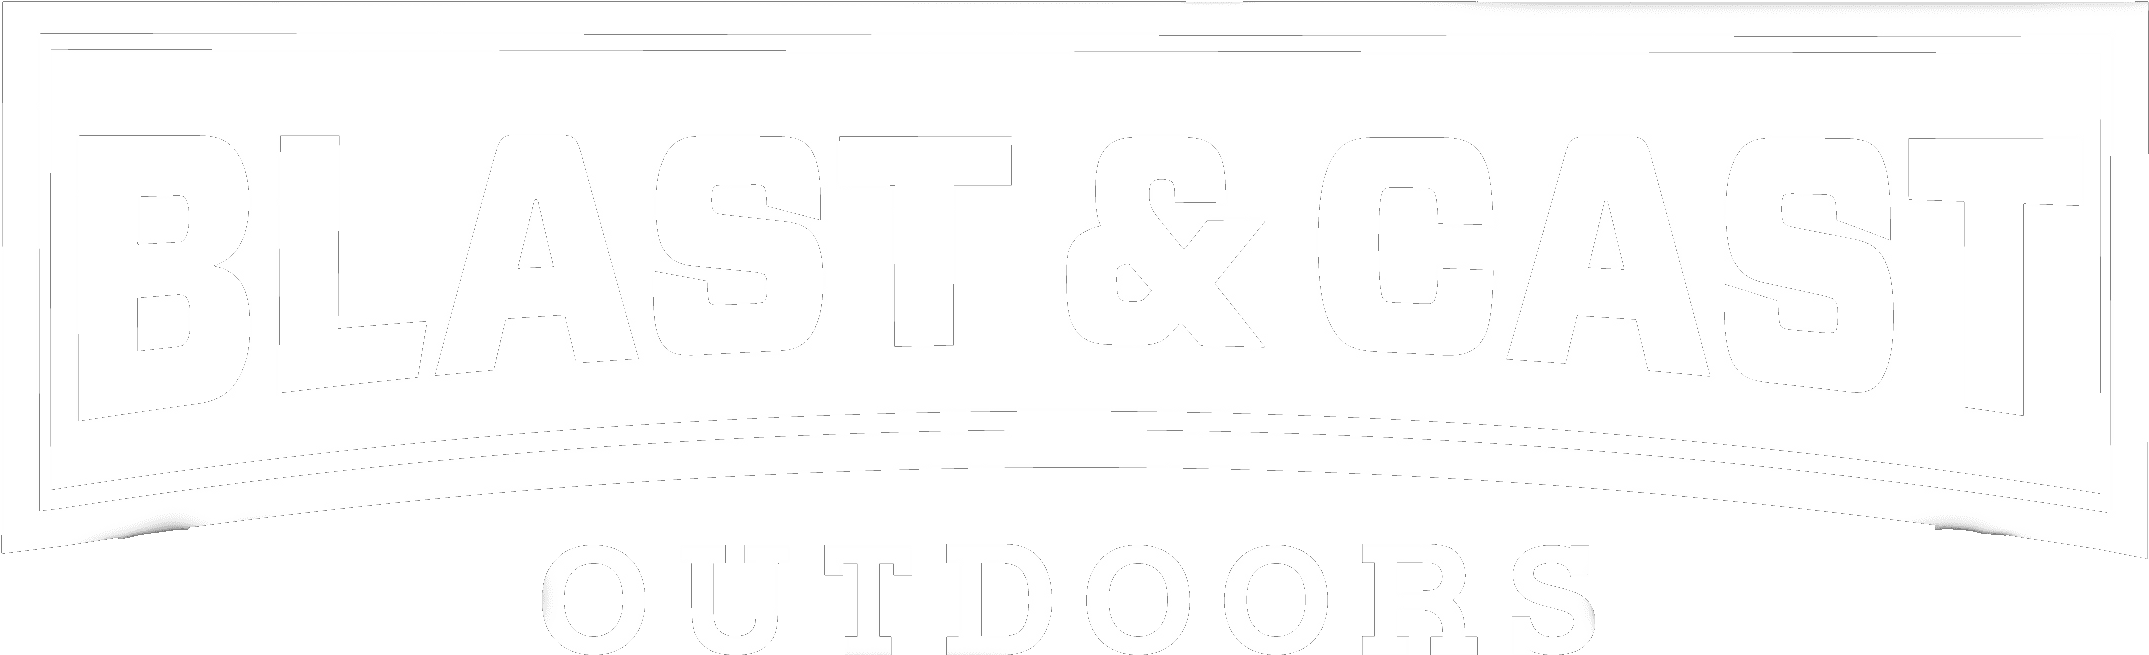 Blast & Cast Outdoors - Printing (2240x762), Png Download